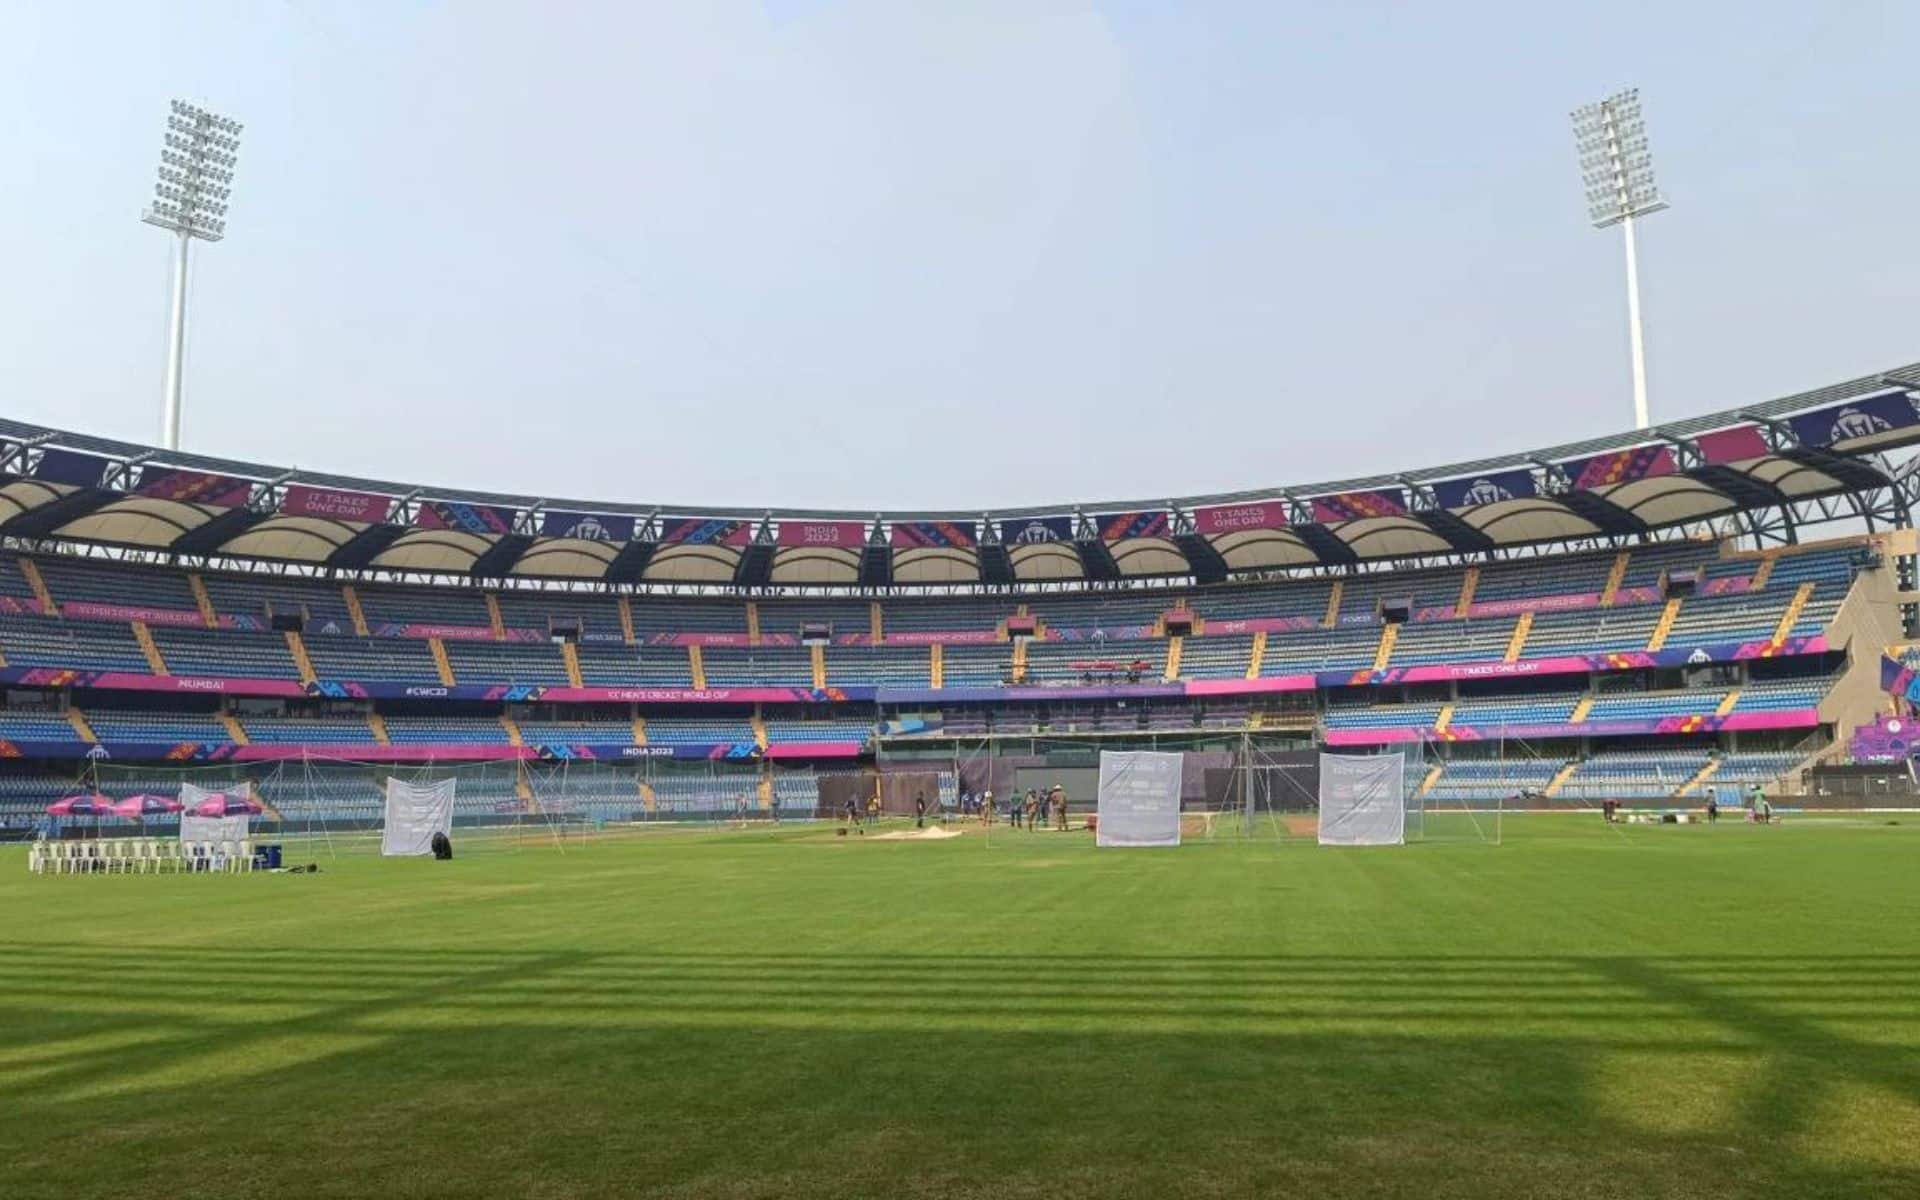 Ranji Trophy 2023-24 Final Likely To Be Hosted At Wankhede Stadium
